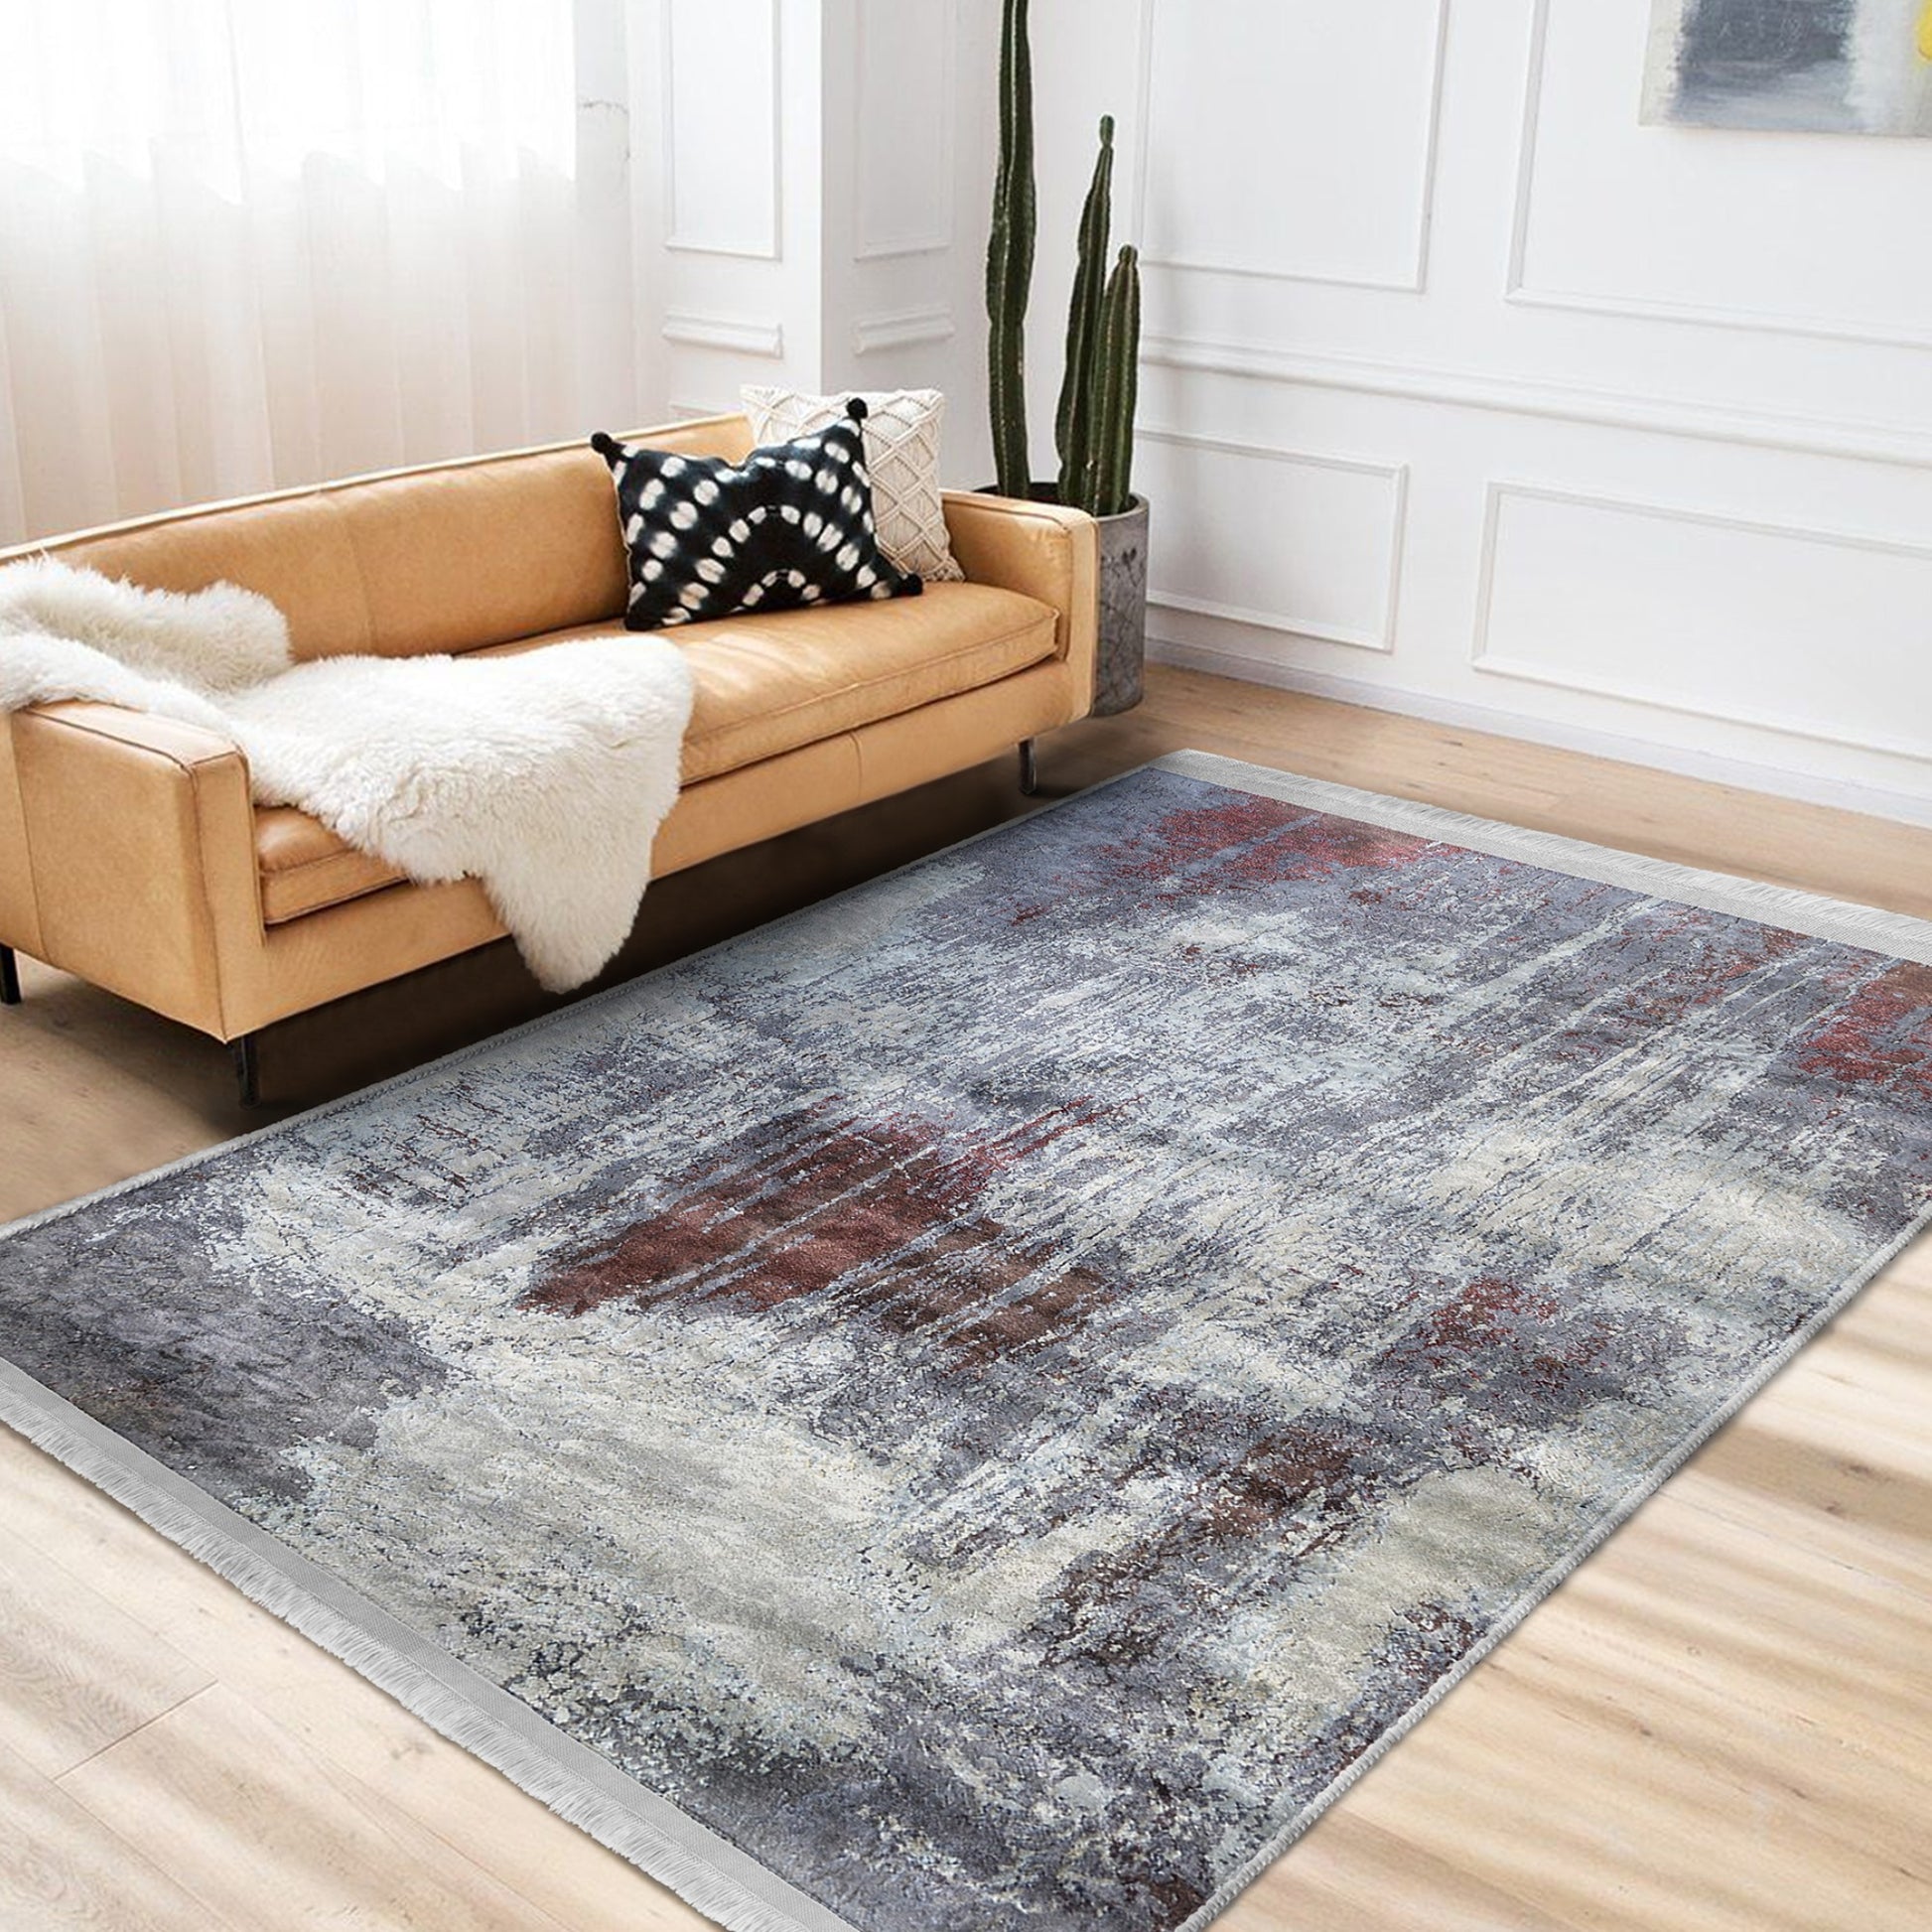 Rustic Patterned Area Rug for a Warm Interior